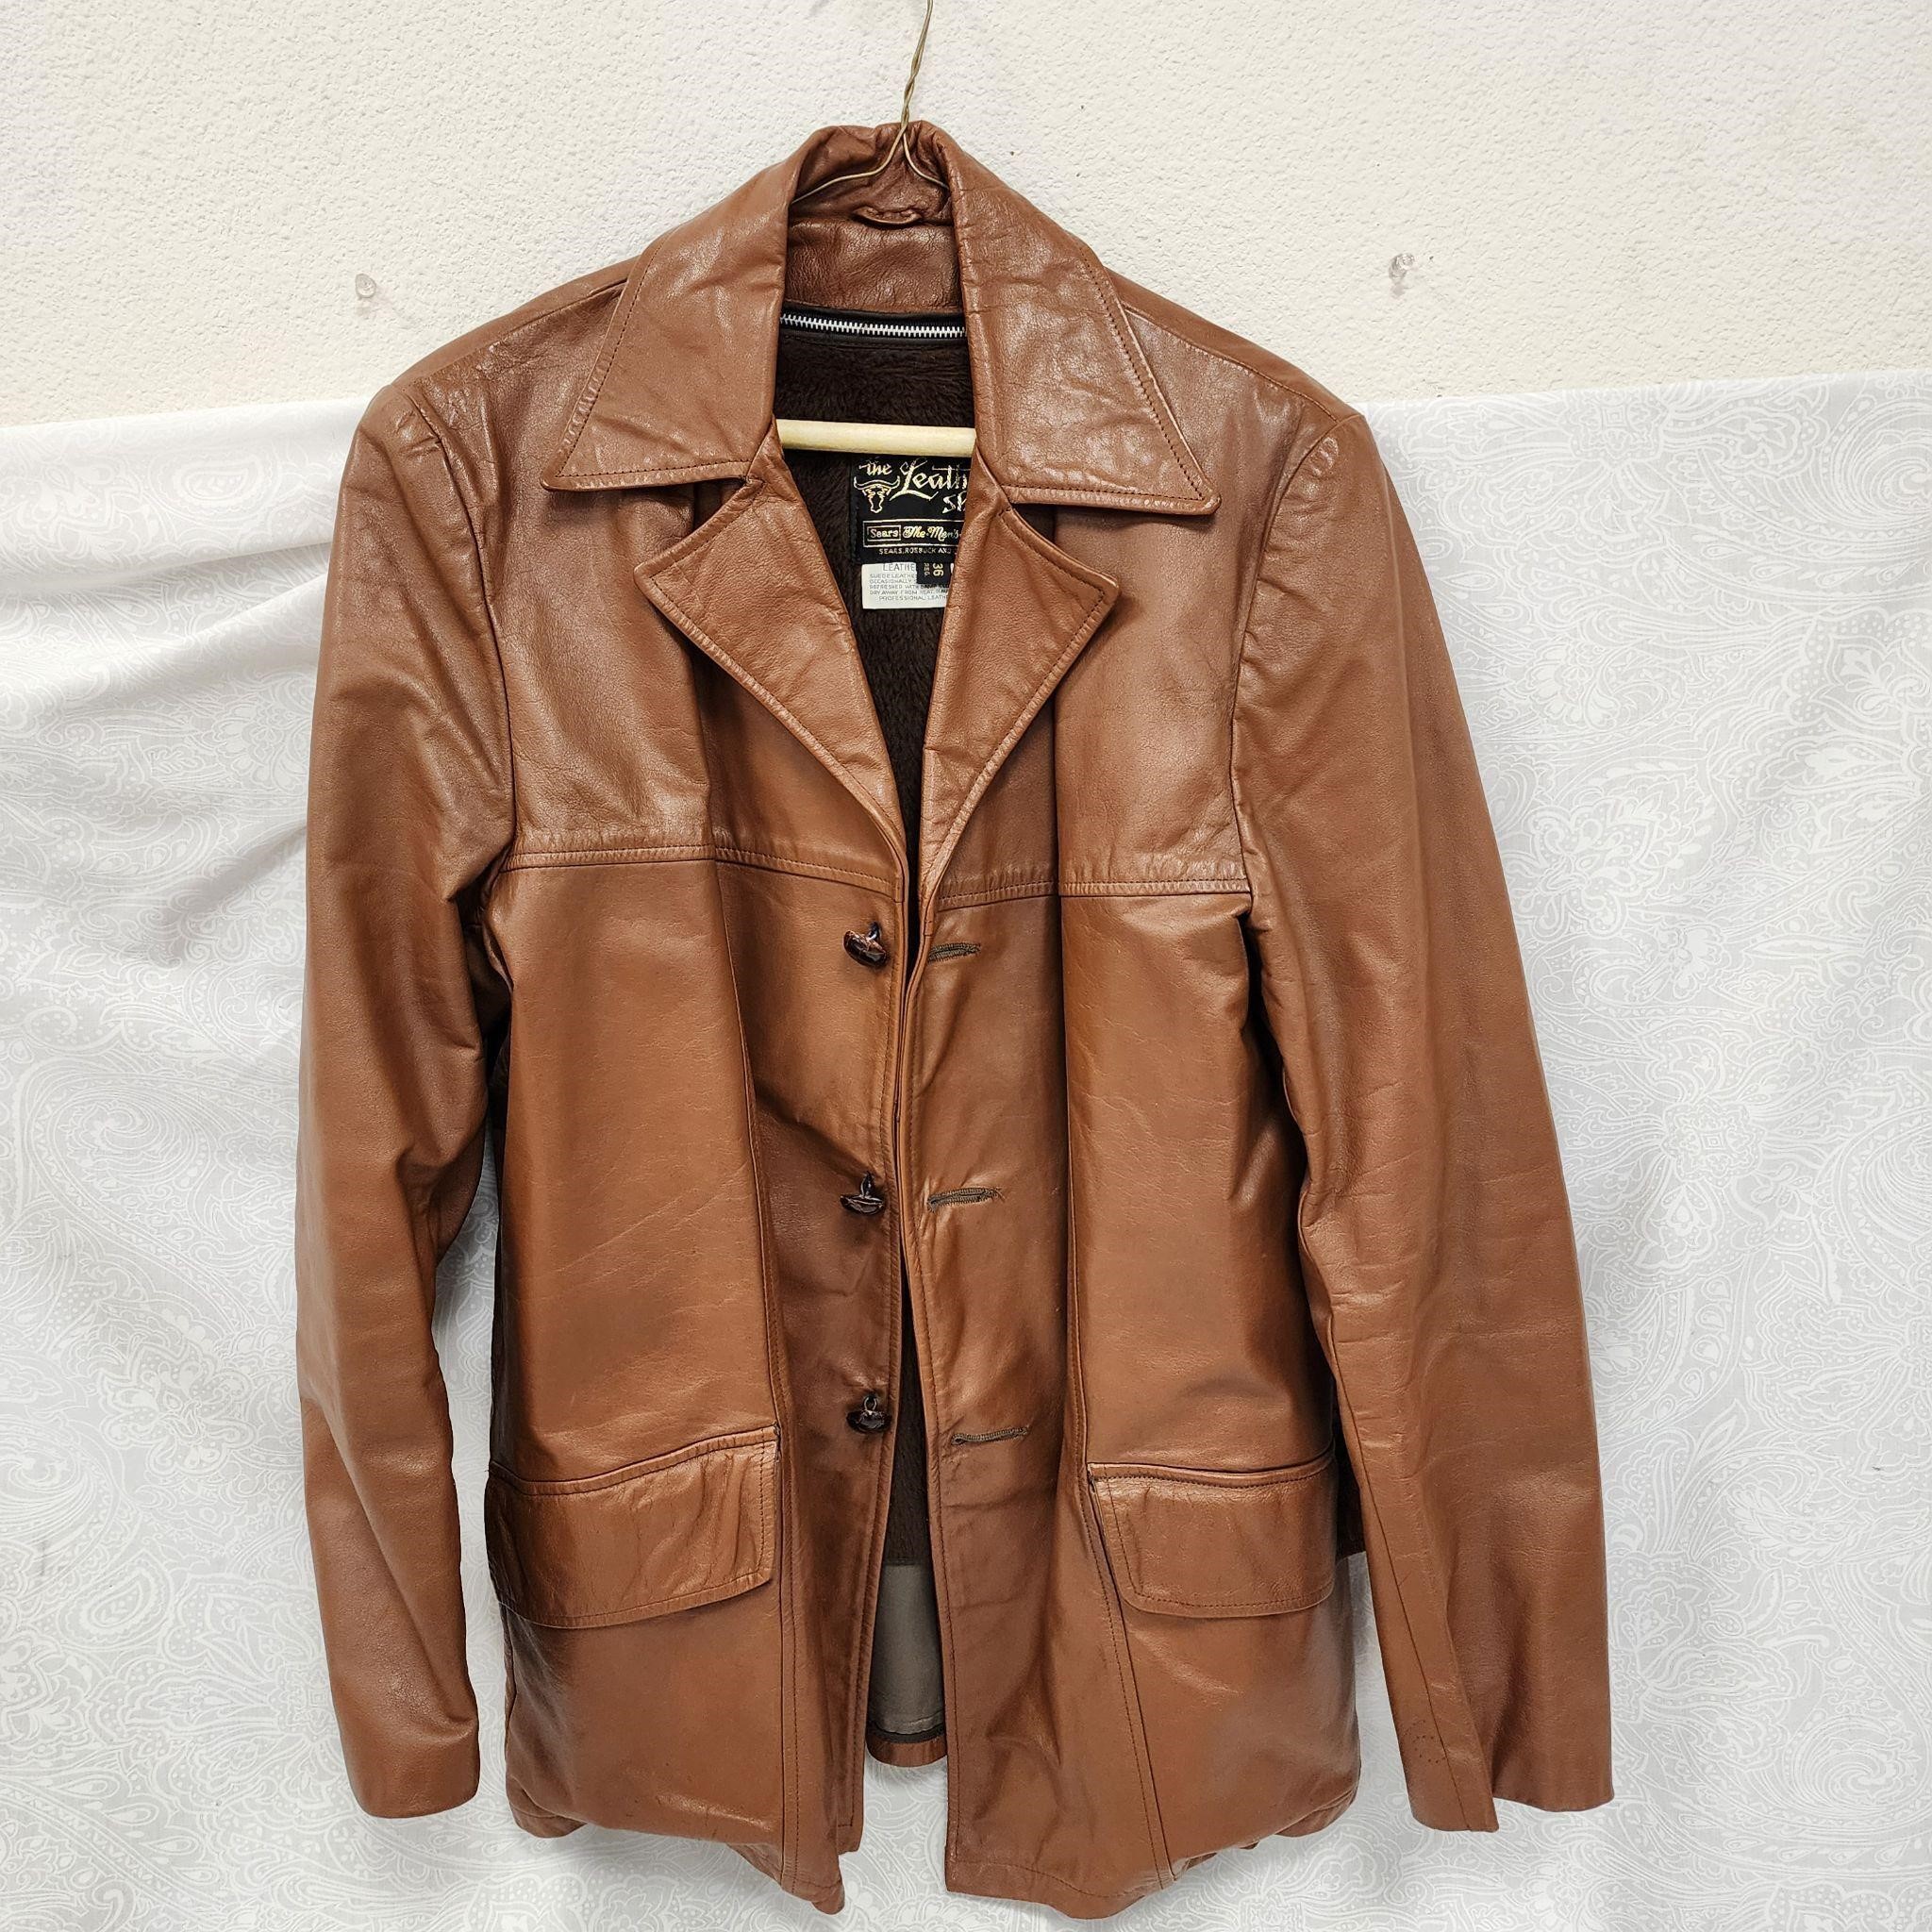 Men's Vintage Leather Jacket In Amazing Condition!